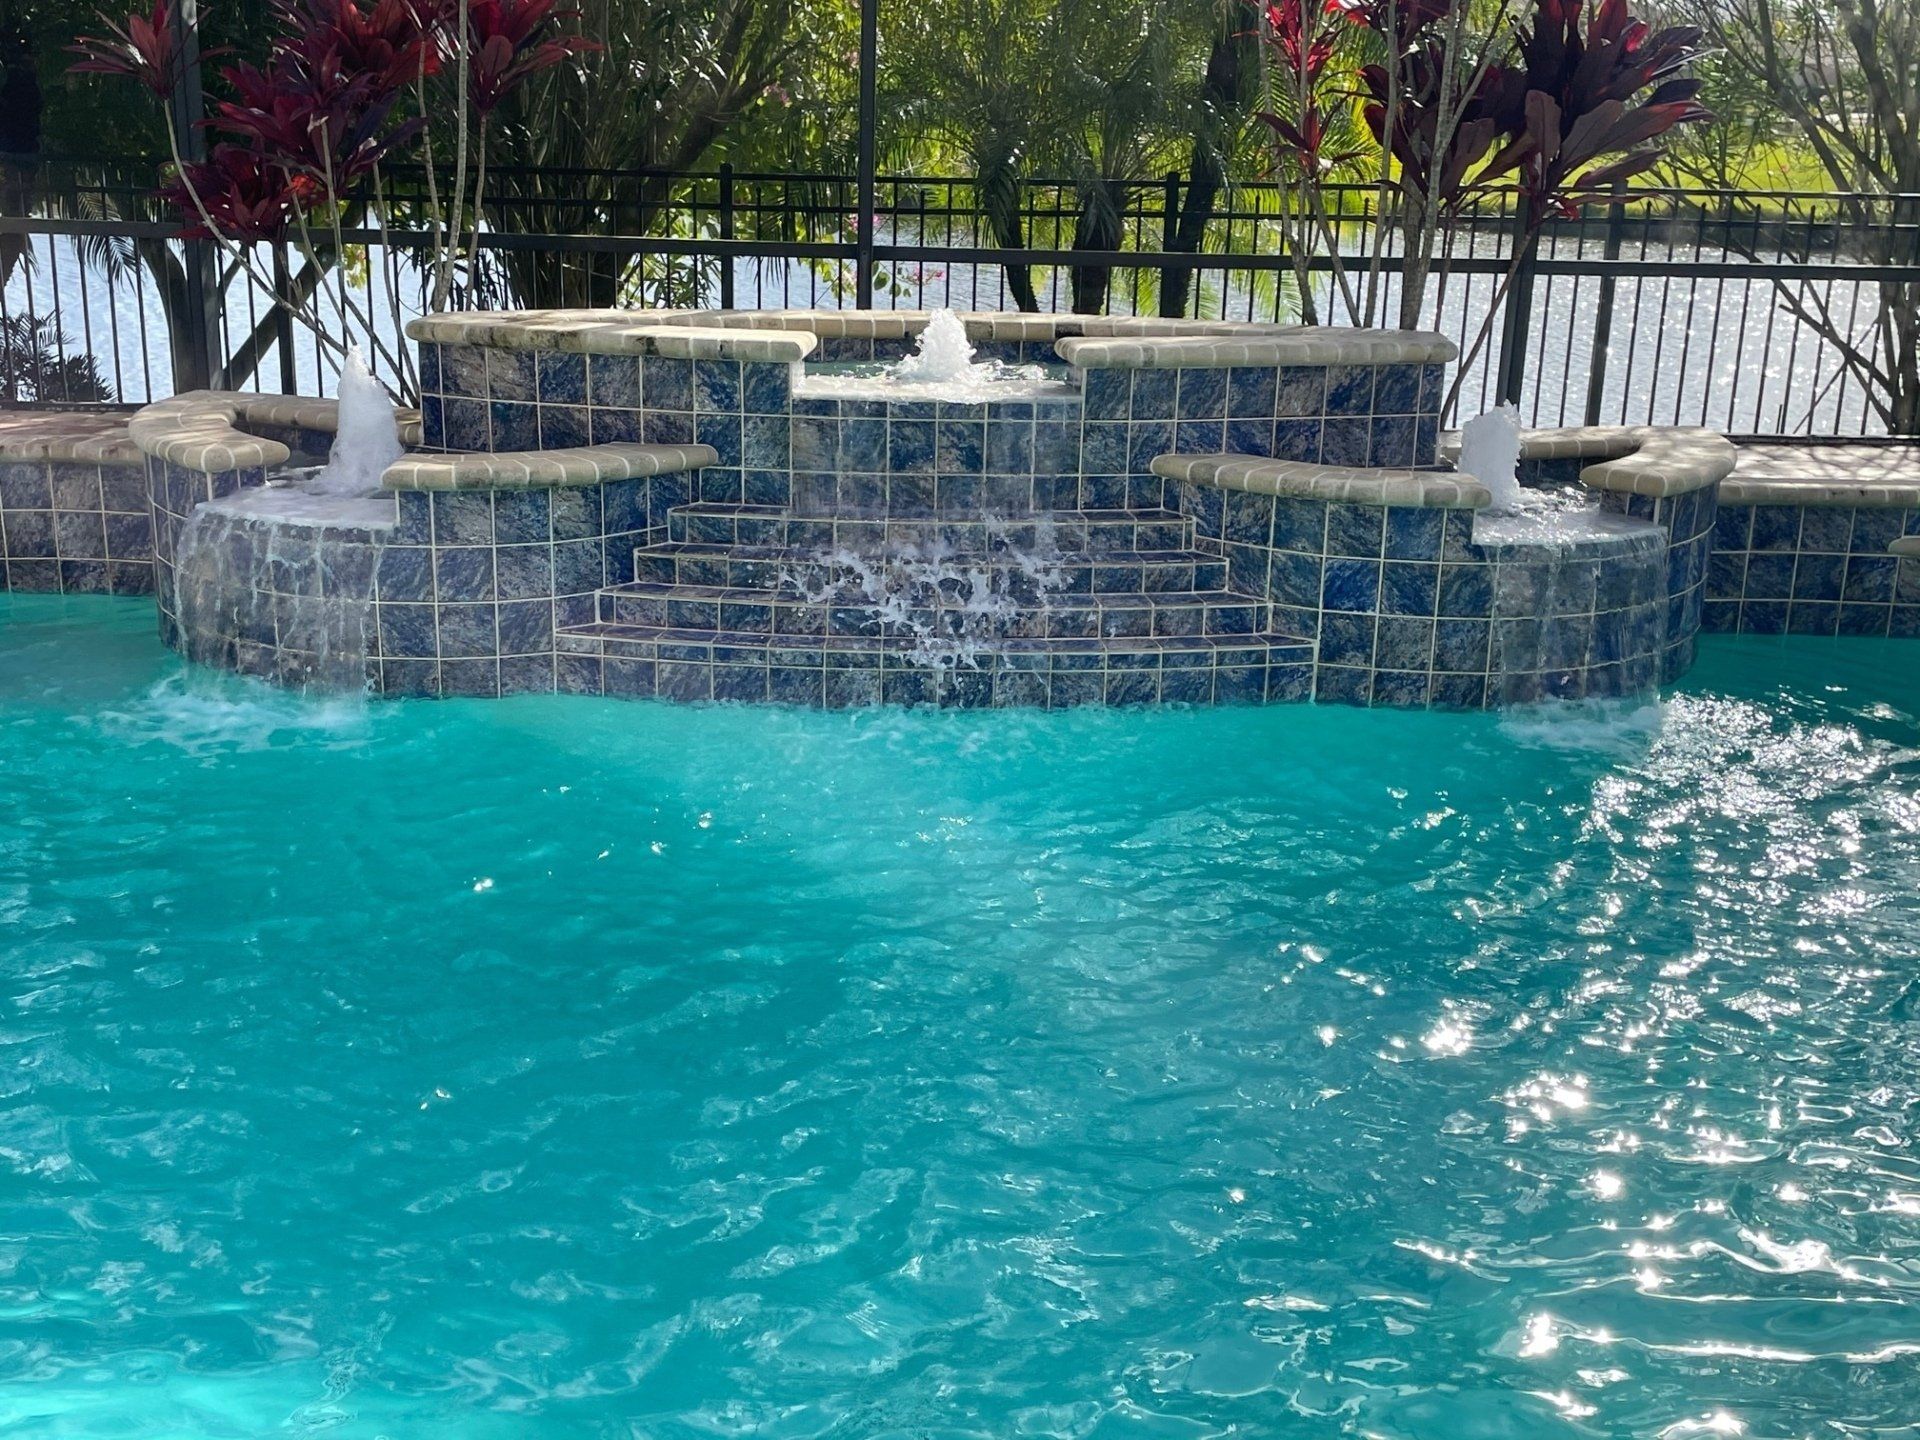 Weekly Pool Cleaning Services in Rockledge, FL